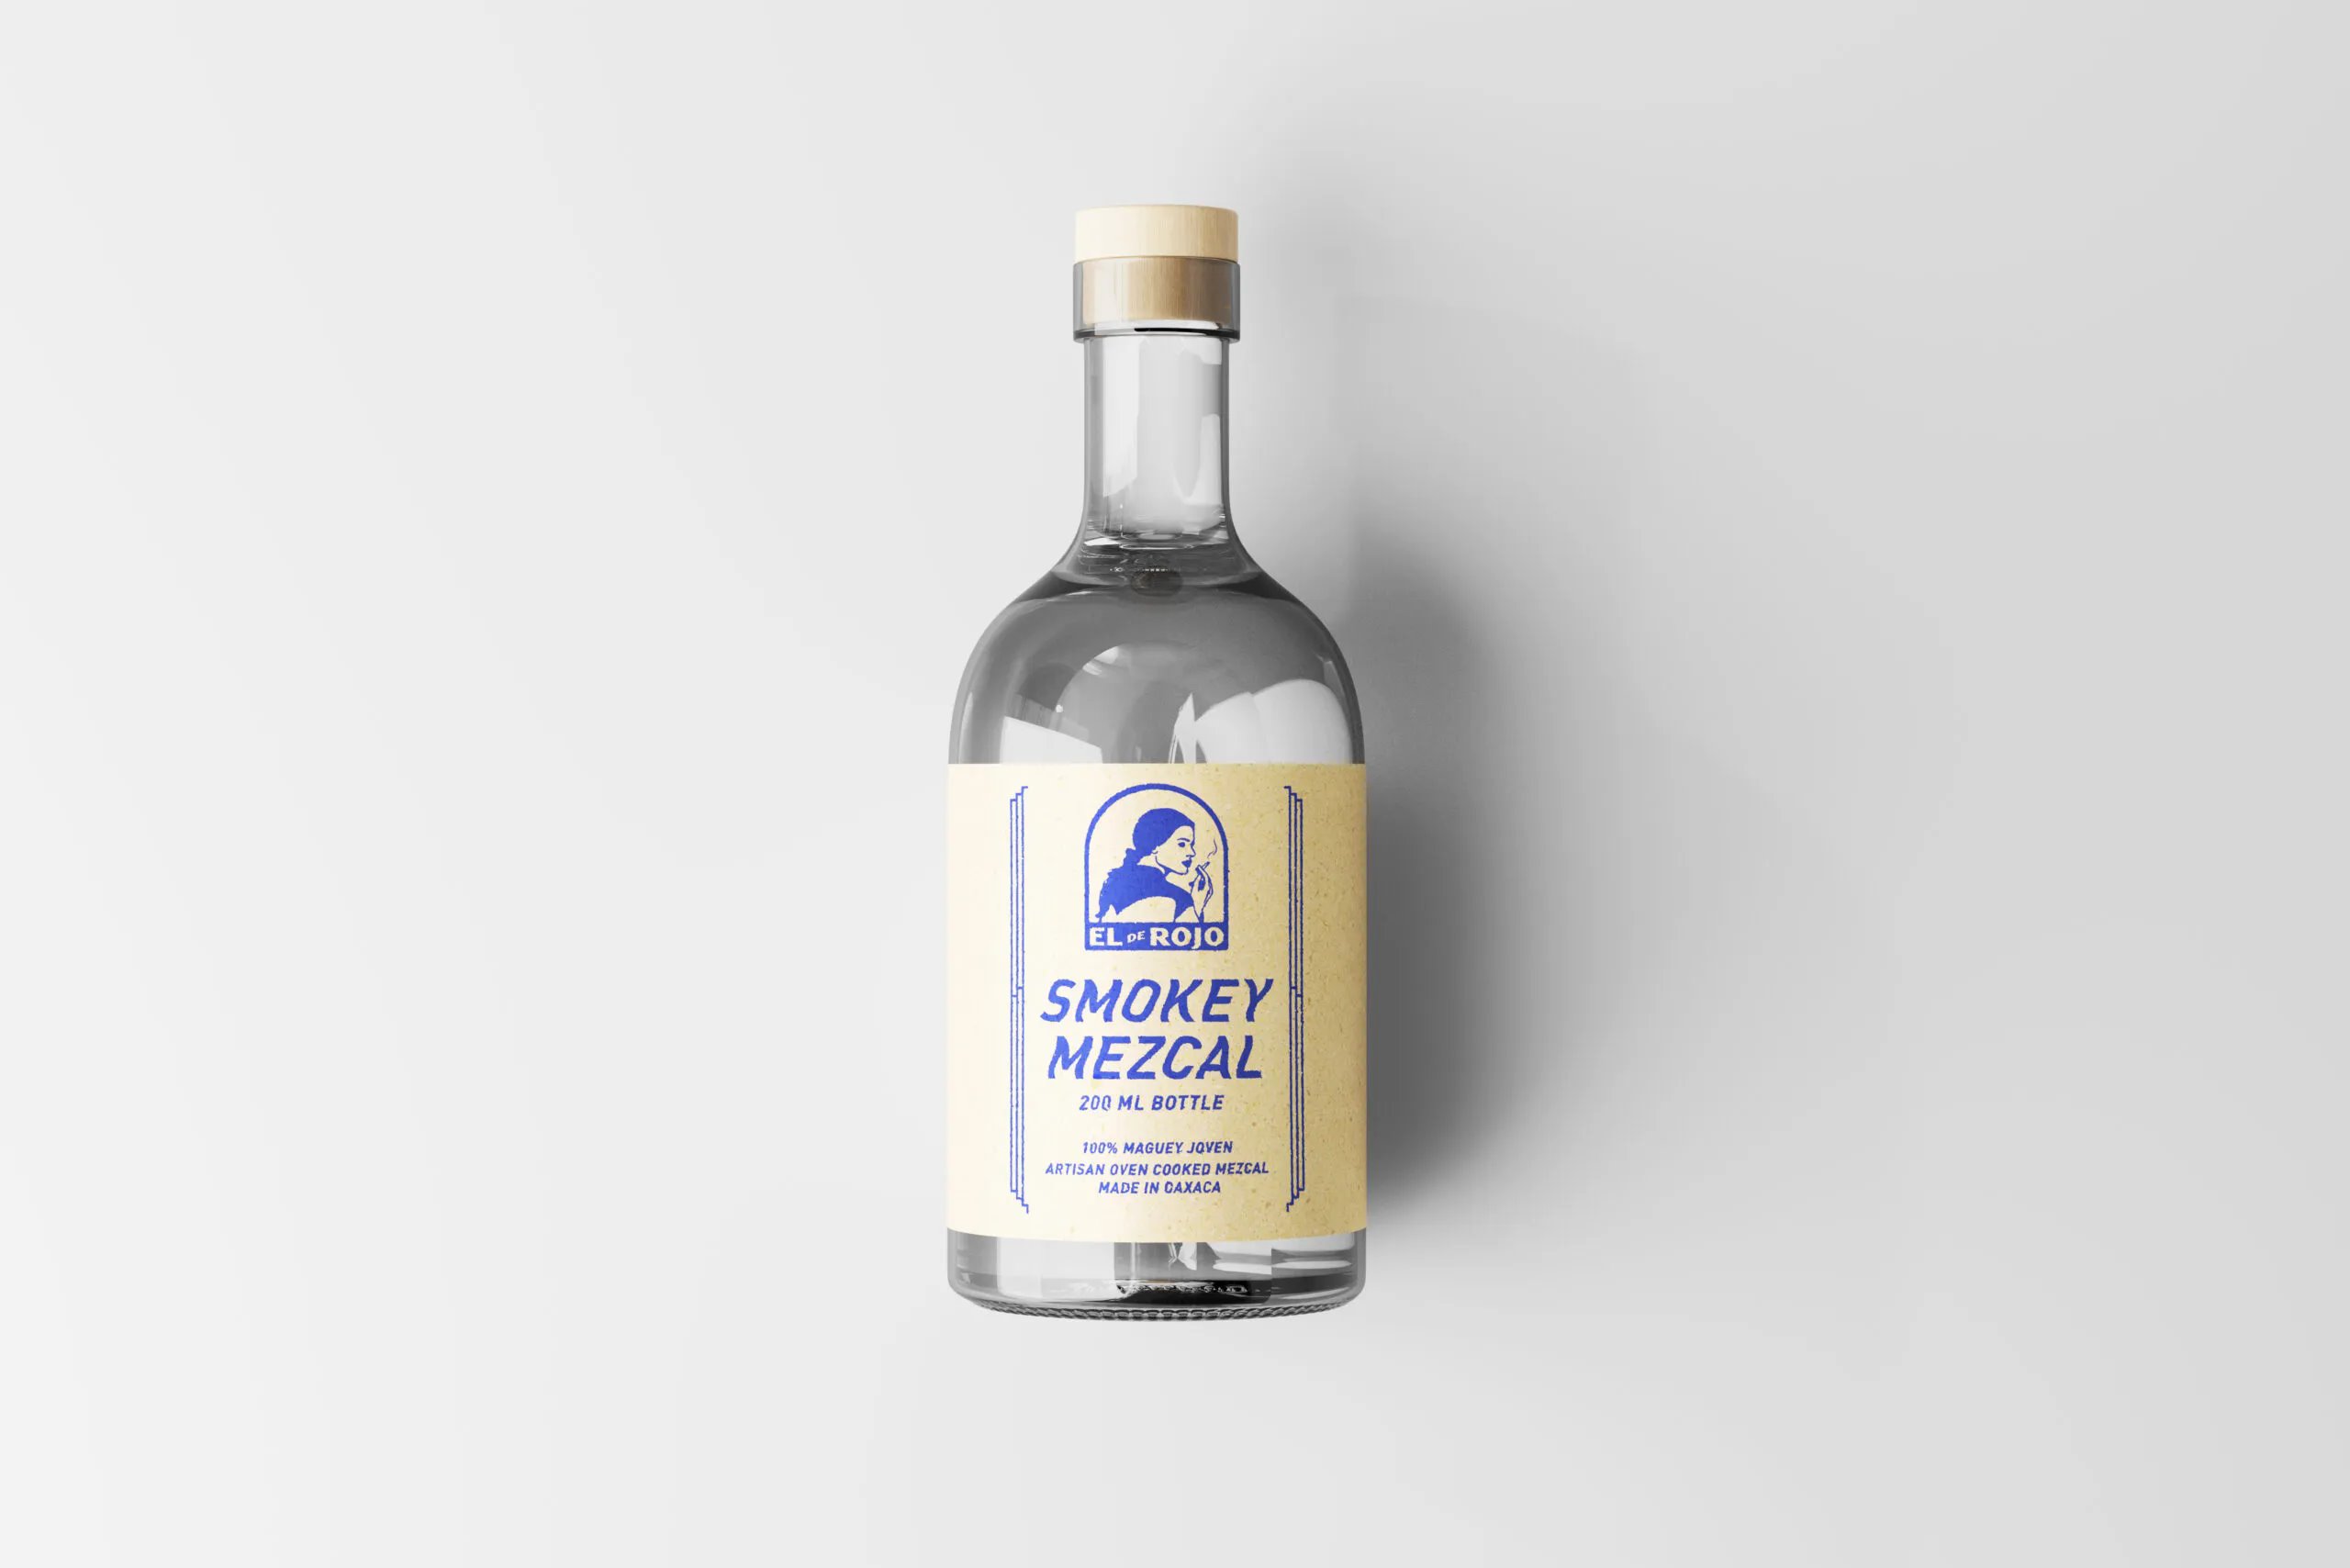 5 Clear Mezcal Bottle Mockups in Different Views FREE PSD